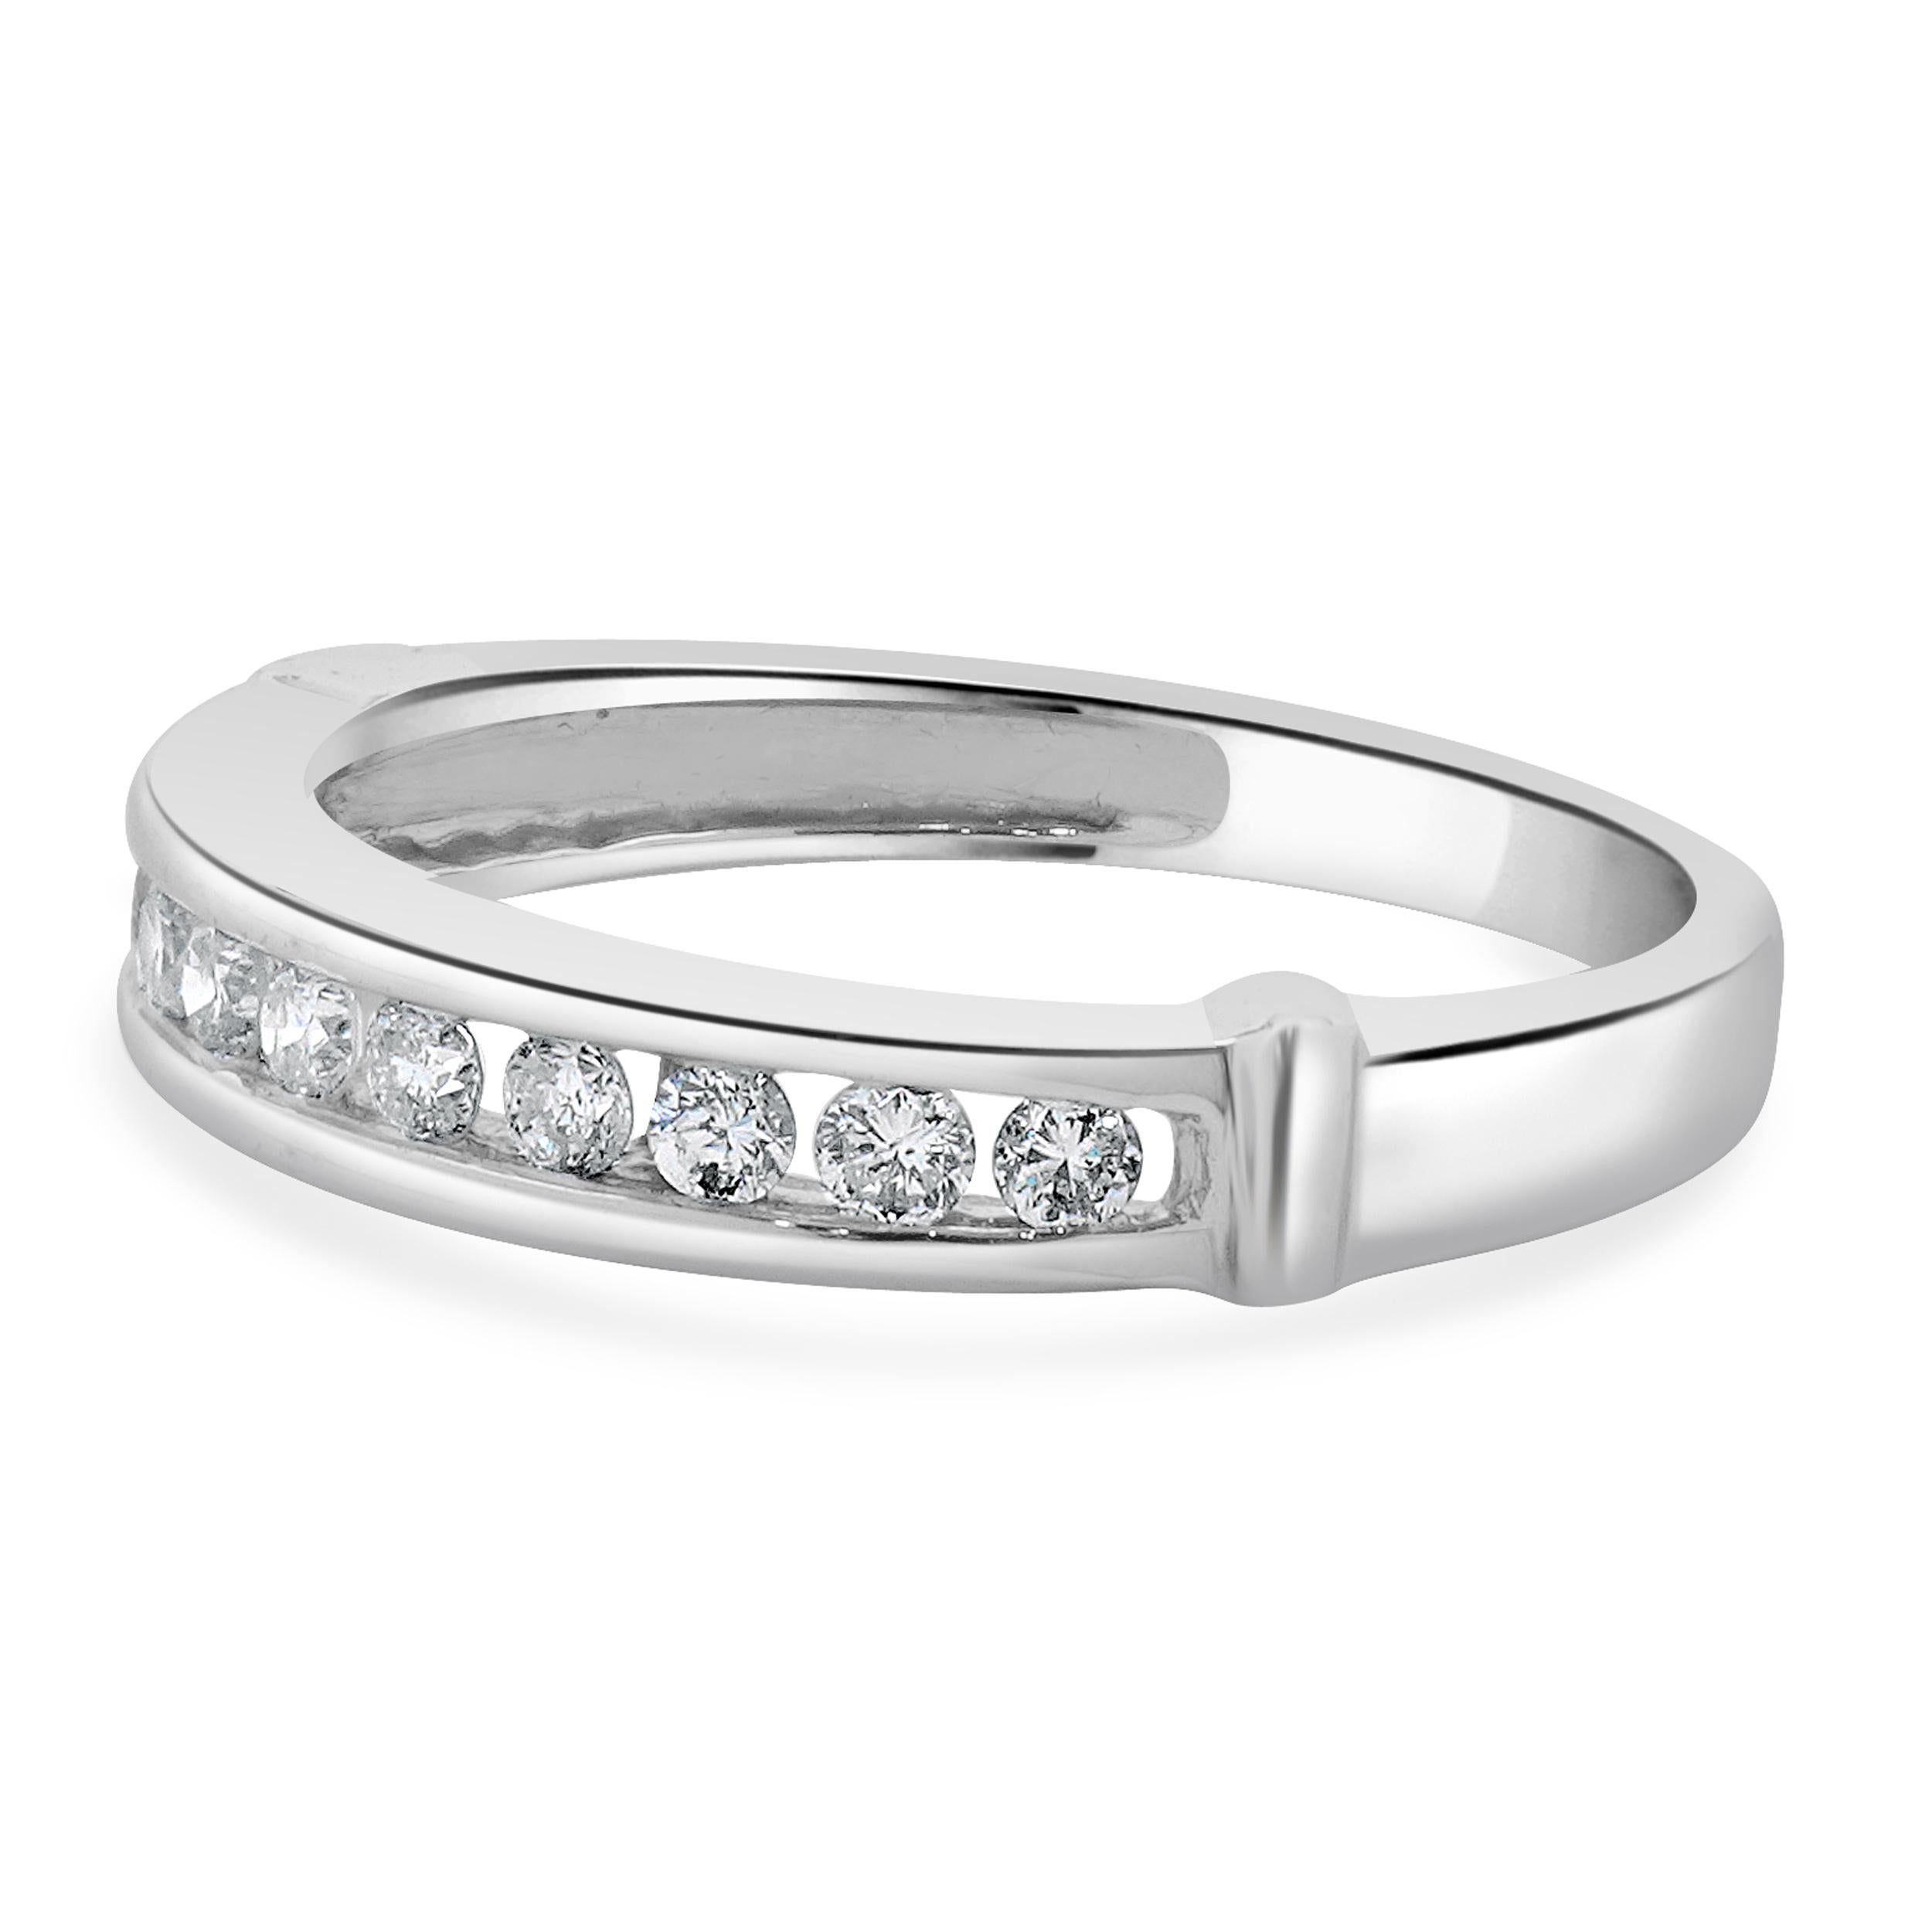 Designer: Custom
Material: 14K white gold
Diamonds: 11 round brilliant cut = 0.22cttw
Color: H
Clarity: SI2-I1
Size: 4.5 sizing available 
Dimensions: ring top measures 3mm in width
Weight: 2.02 grams
